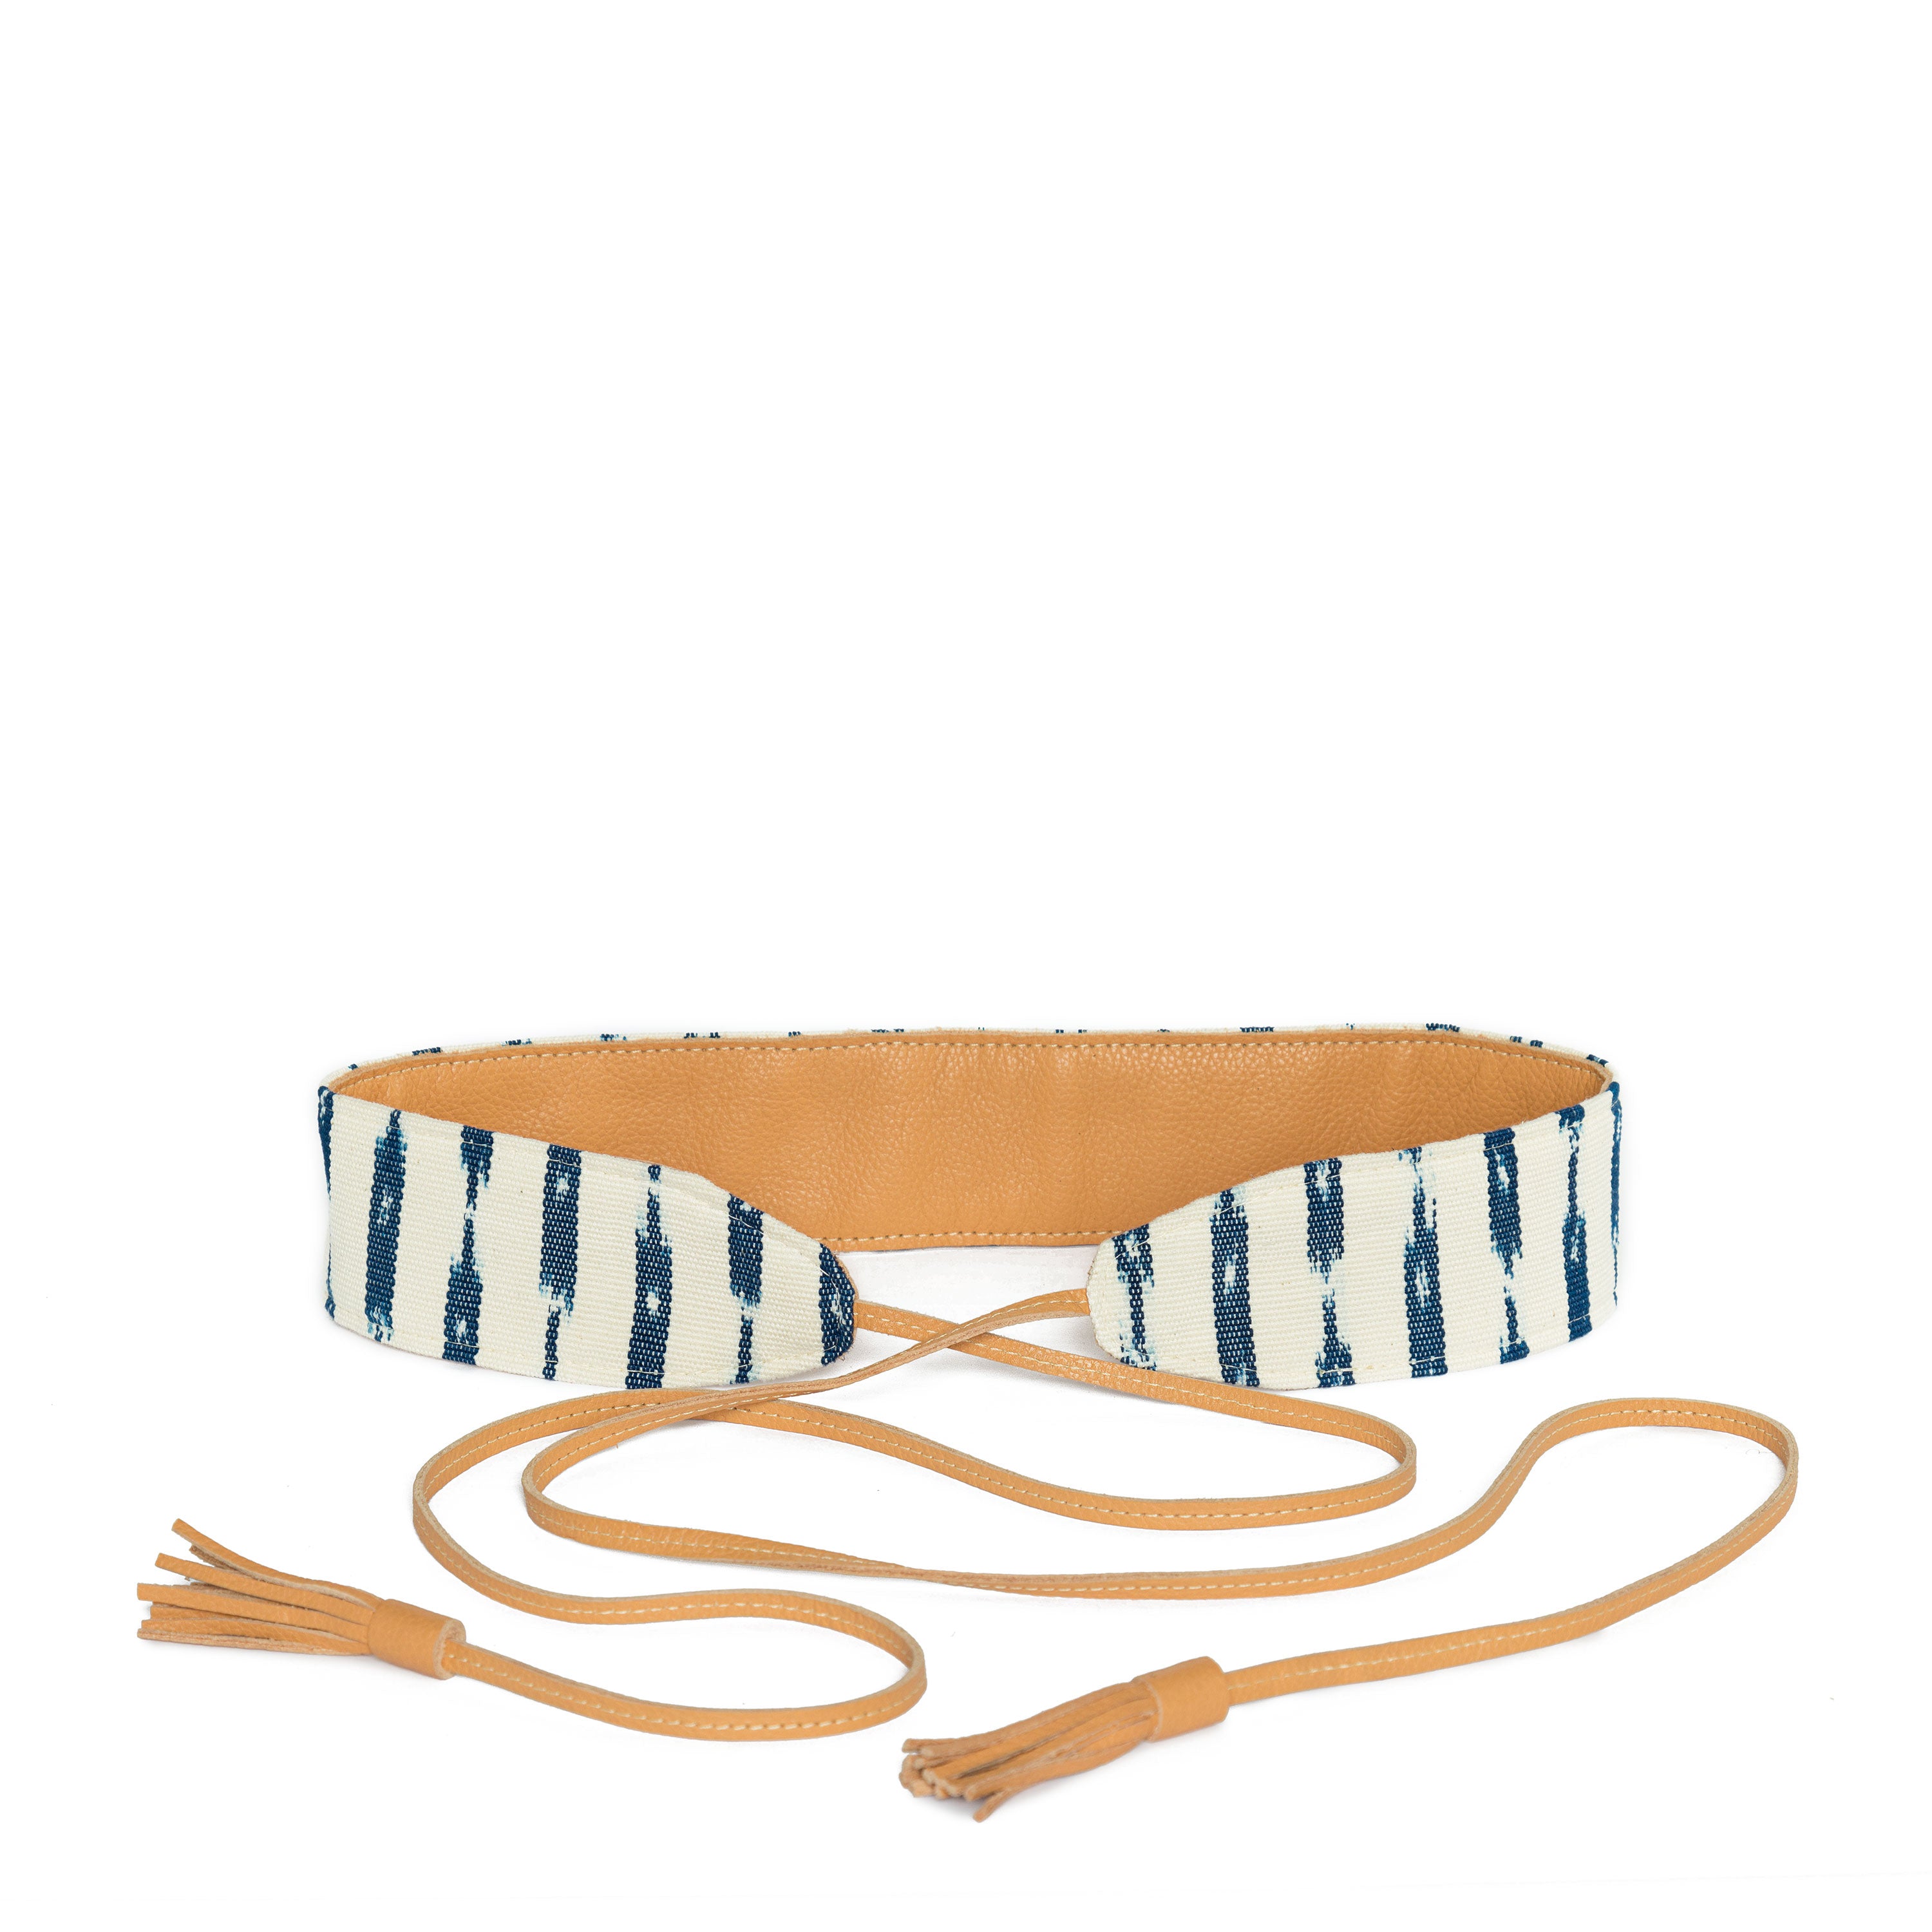 Hand woven Wrap Belt - Ethical Shopping at Mercado Global